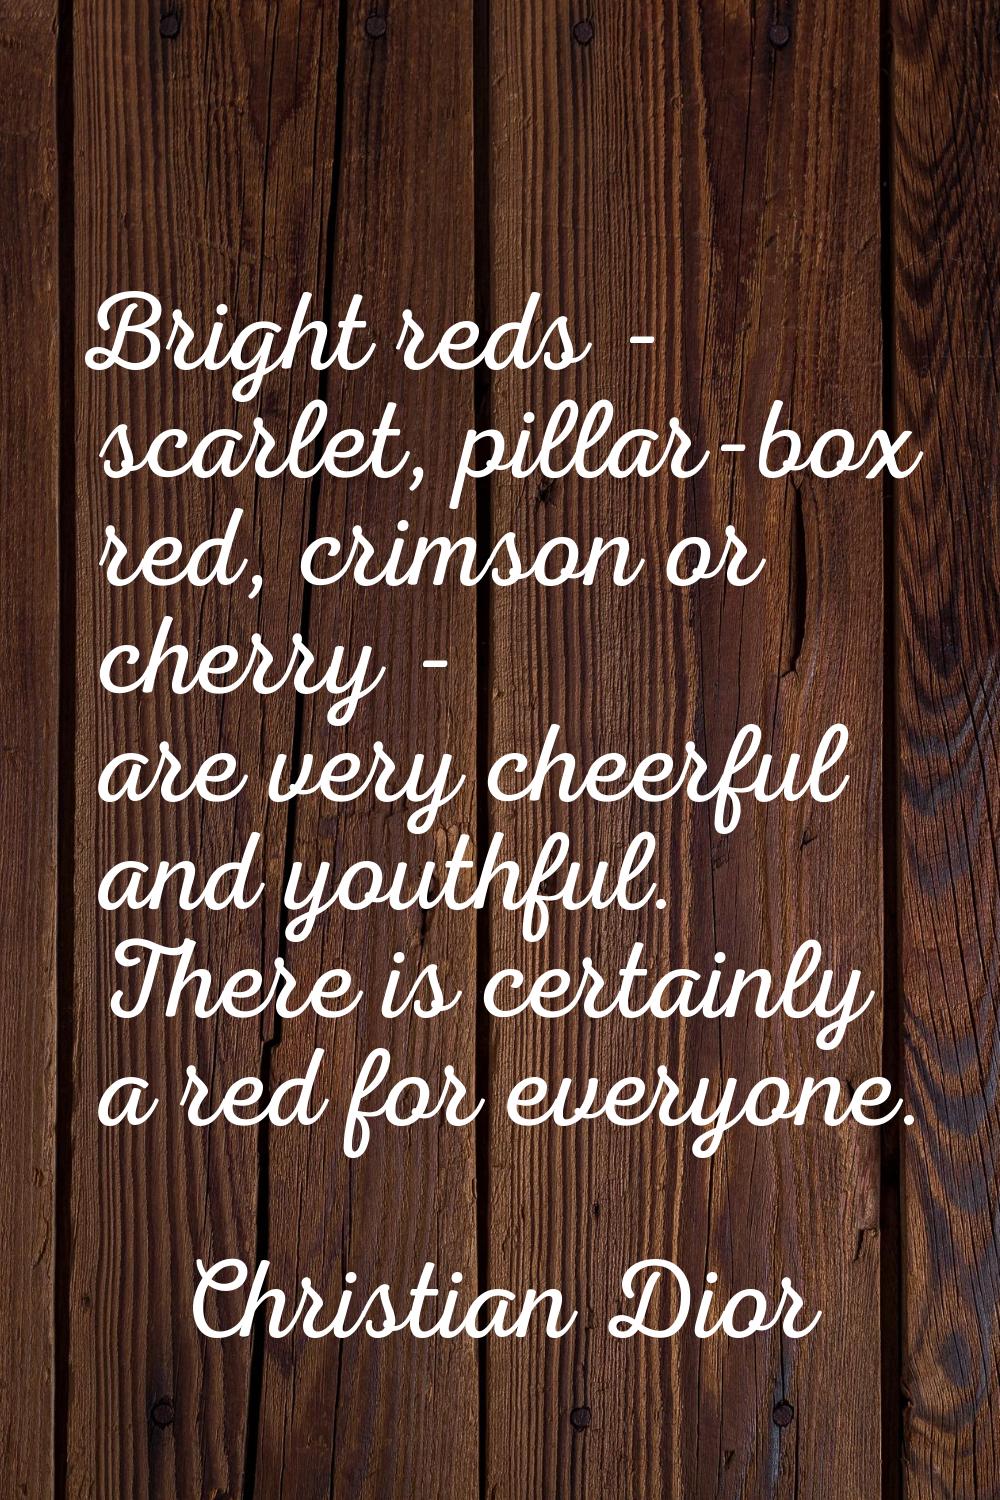 Bright reds - scarlet, pillar-box red, crimson or cherry - are very cheerful and youthful. There is